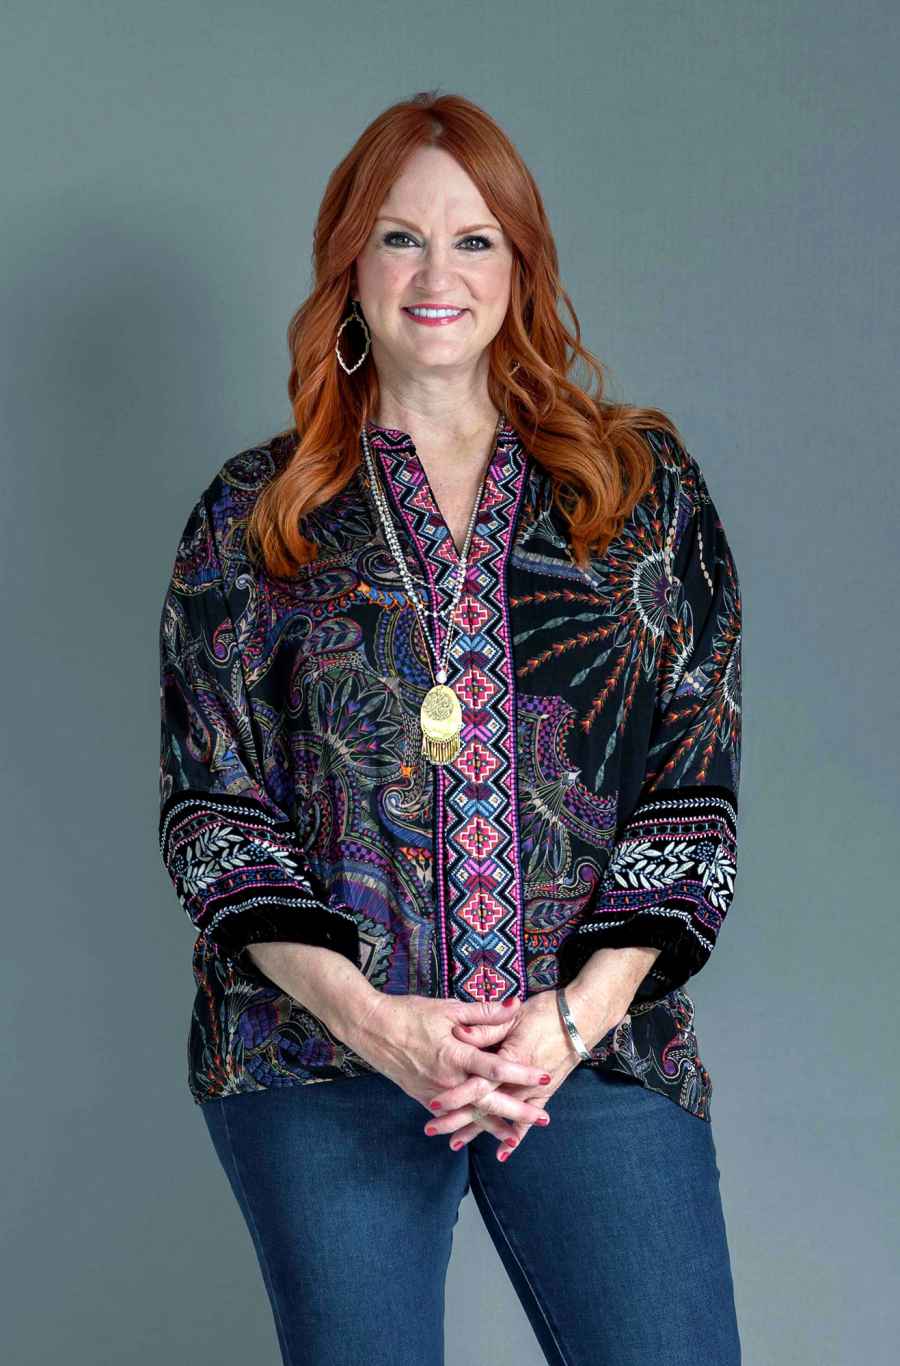 Food Network Stars Salaries See How Much Money Bobby Flay Ree Drummond and More Make